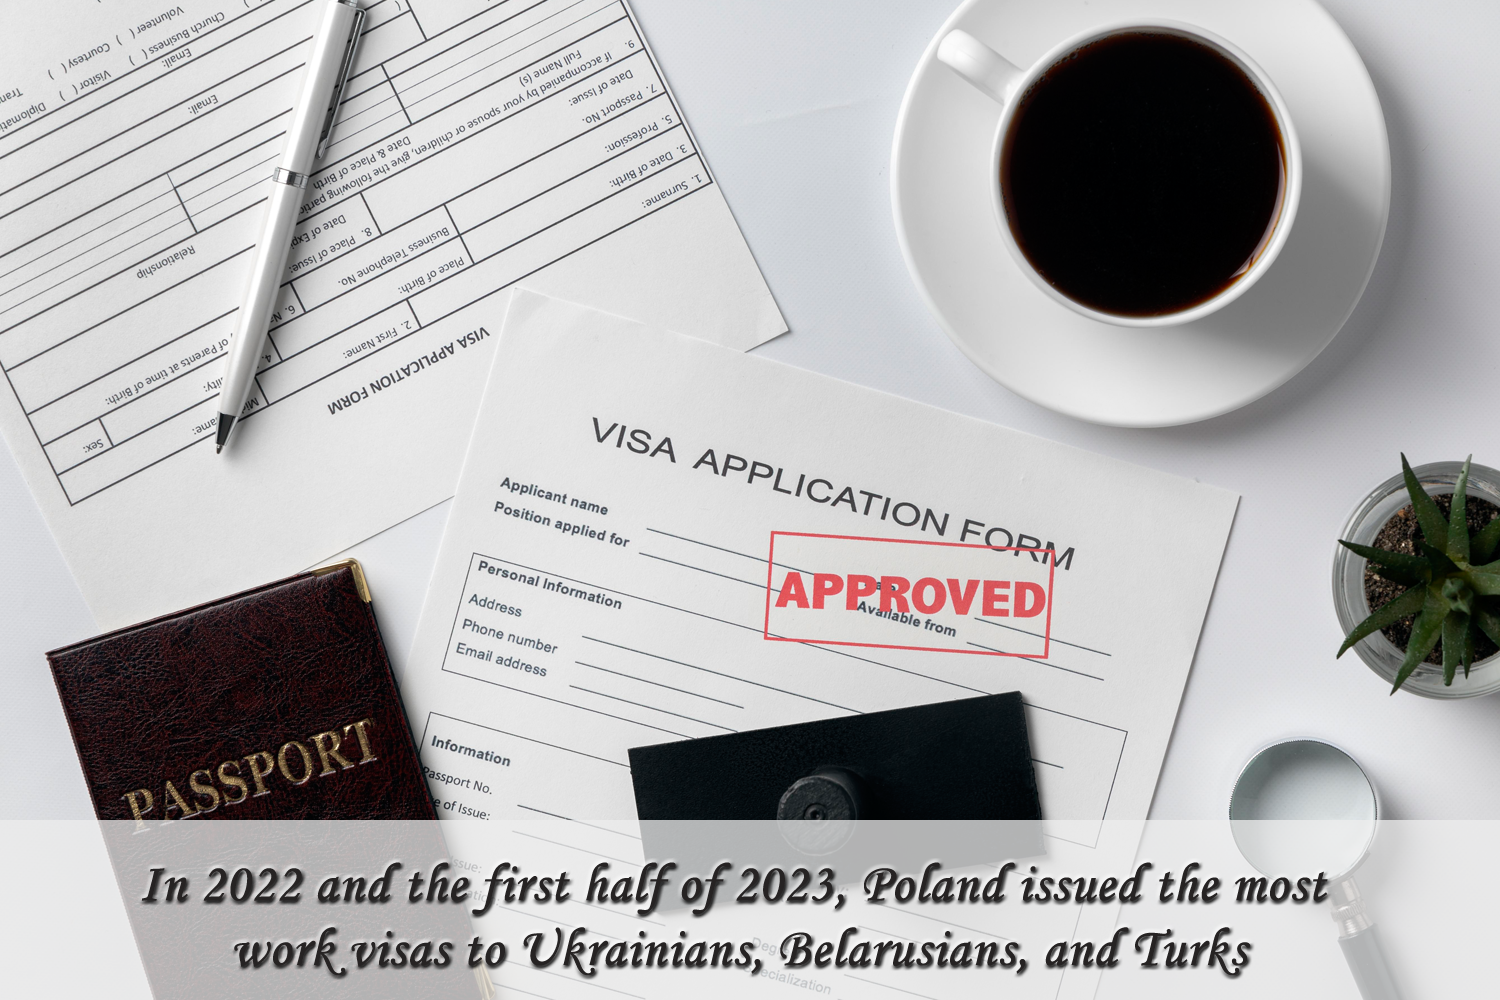 In 2022 and the first half of 2023, Poland issued the most work visas to Ukrainians, Belarusians, and Turks.